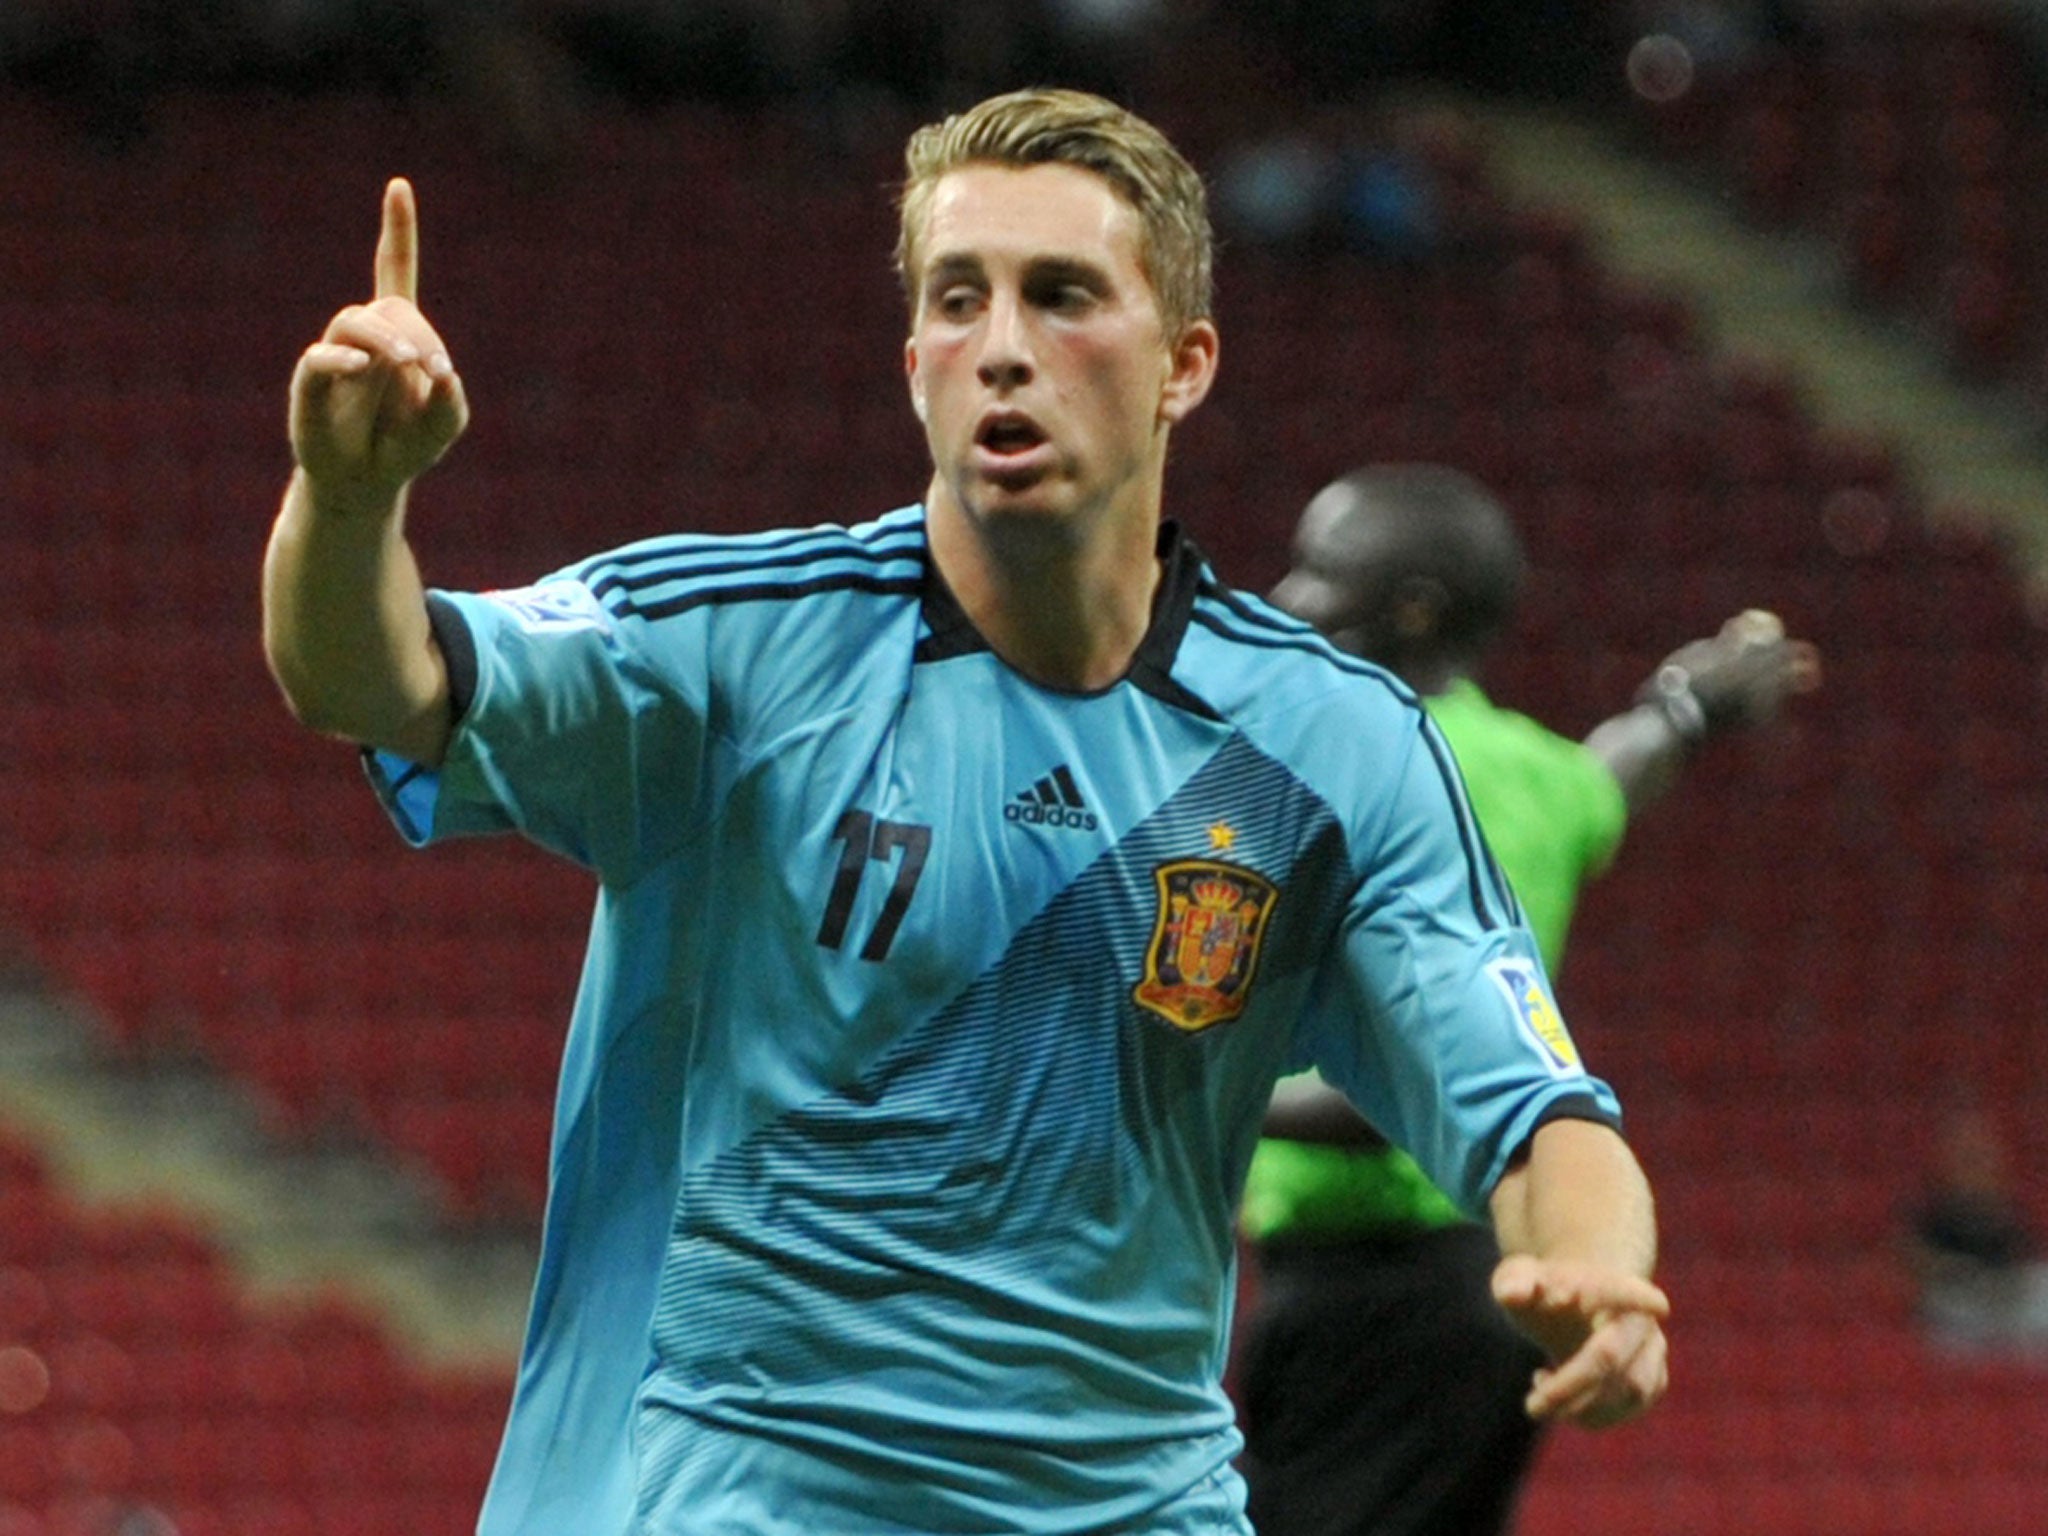 Gerard Deulofeu shone for Spain Under-21s and has been likened to a young Cristiano Ronaldo